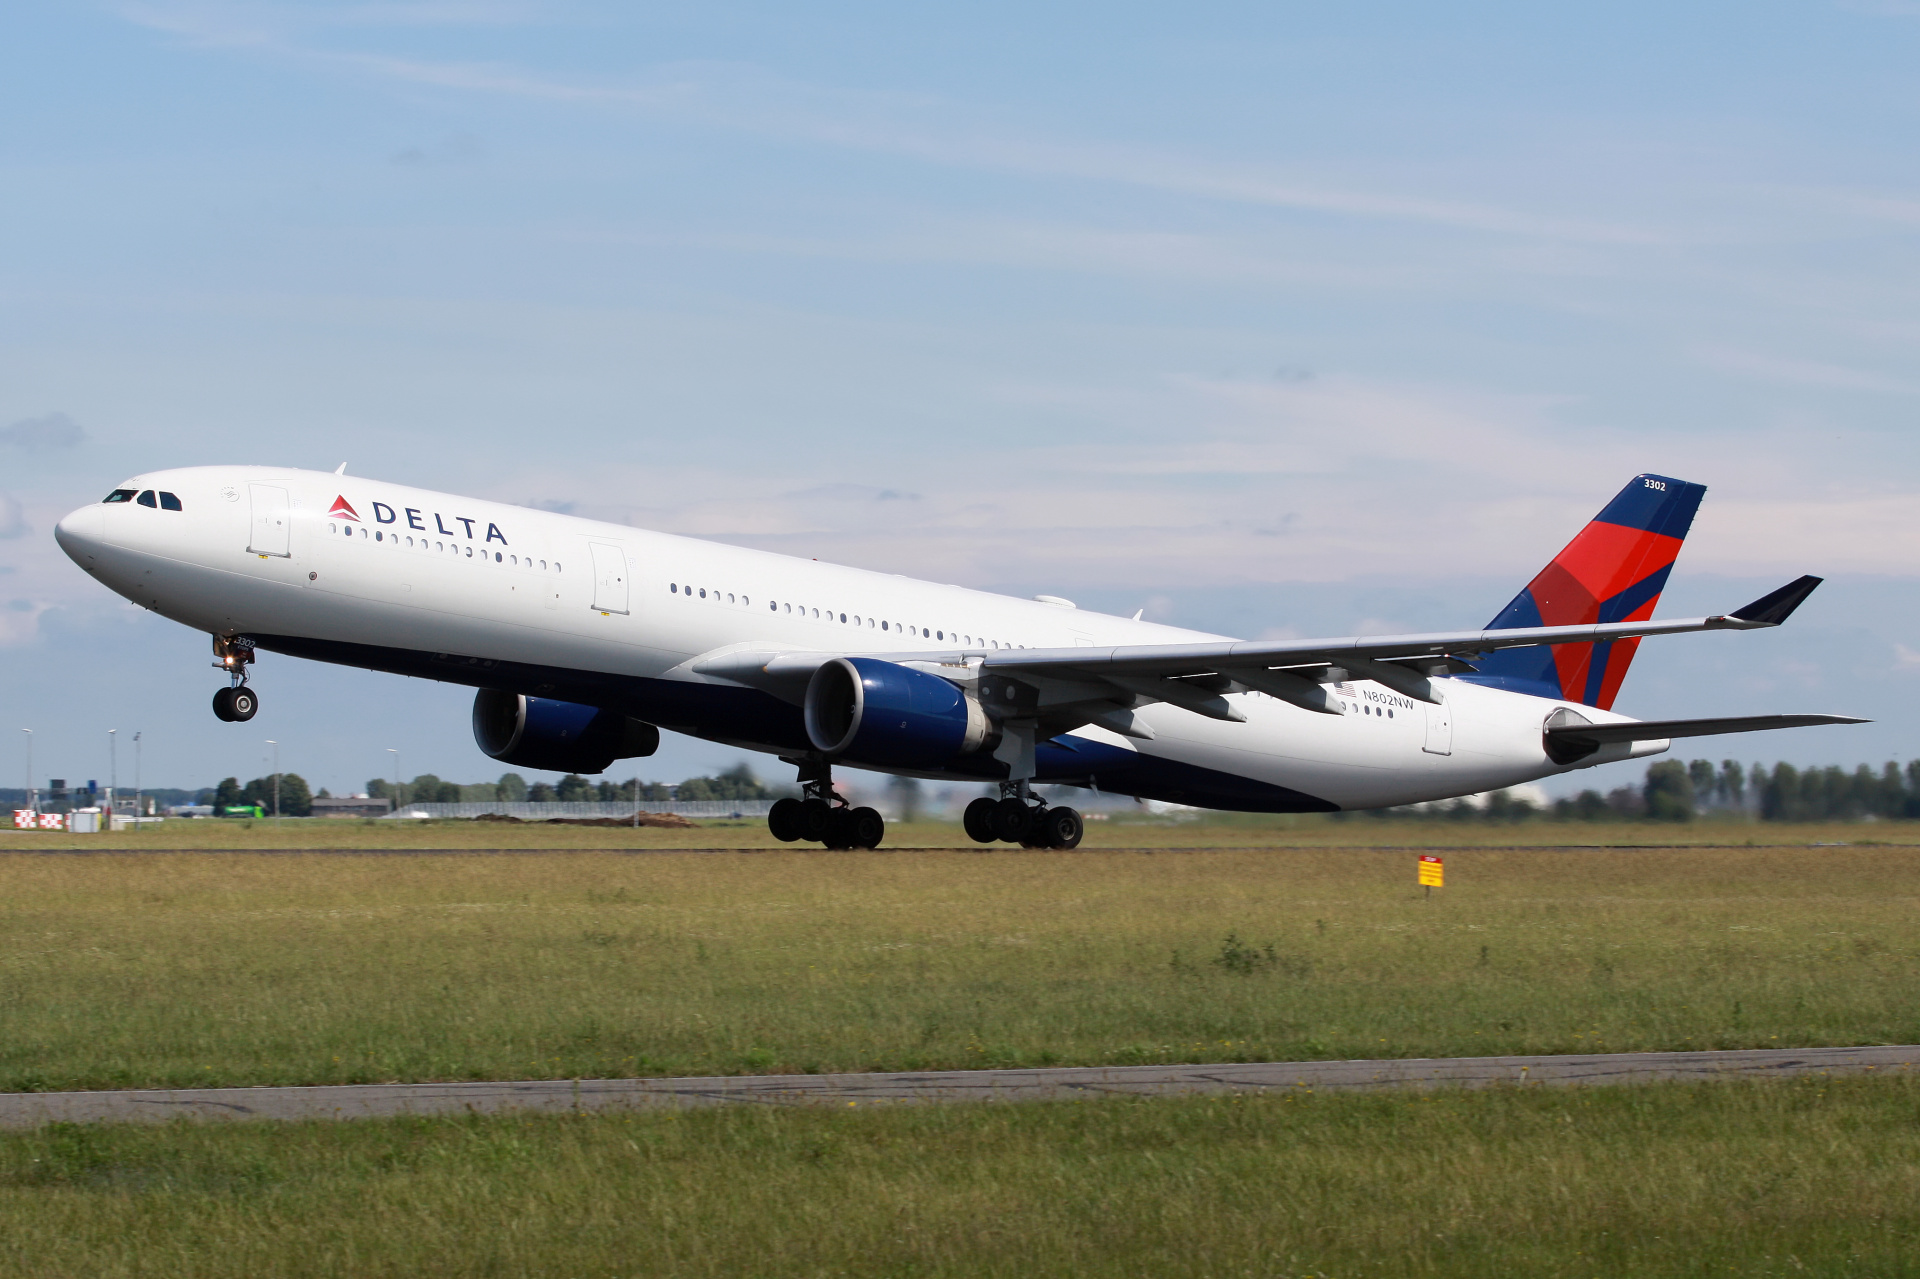 N802NW (Aircraft » Schiphol Spotting » Airbus A330-300 » Delta Airlines)